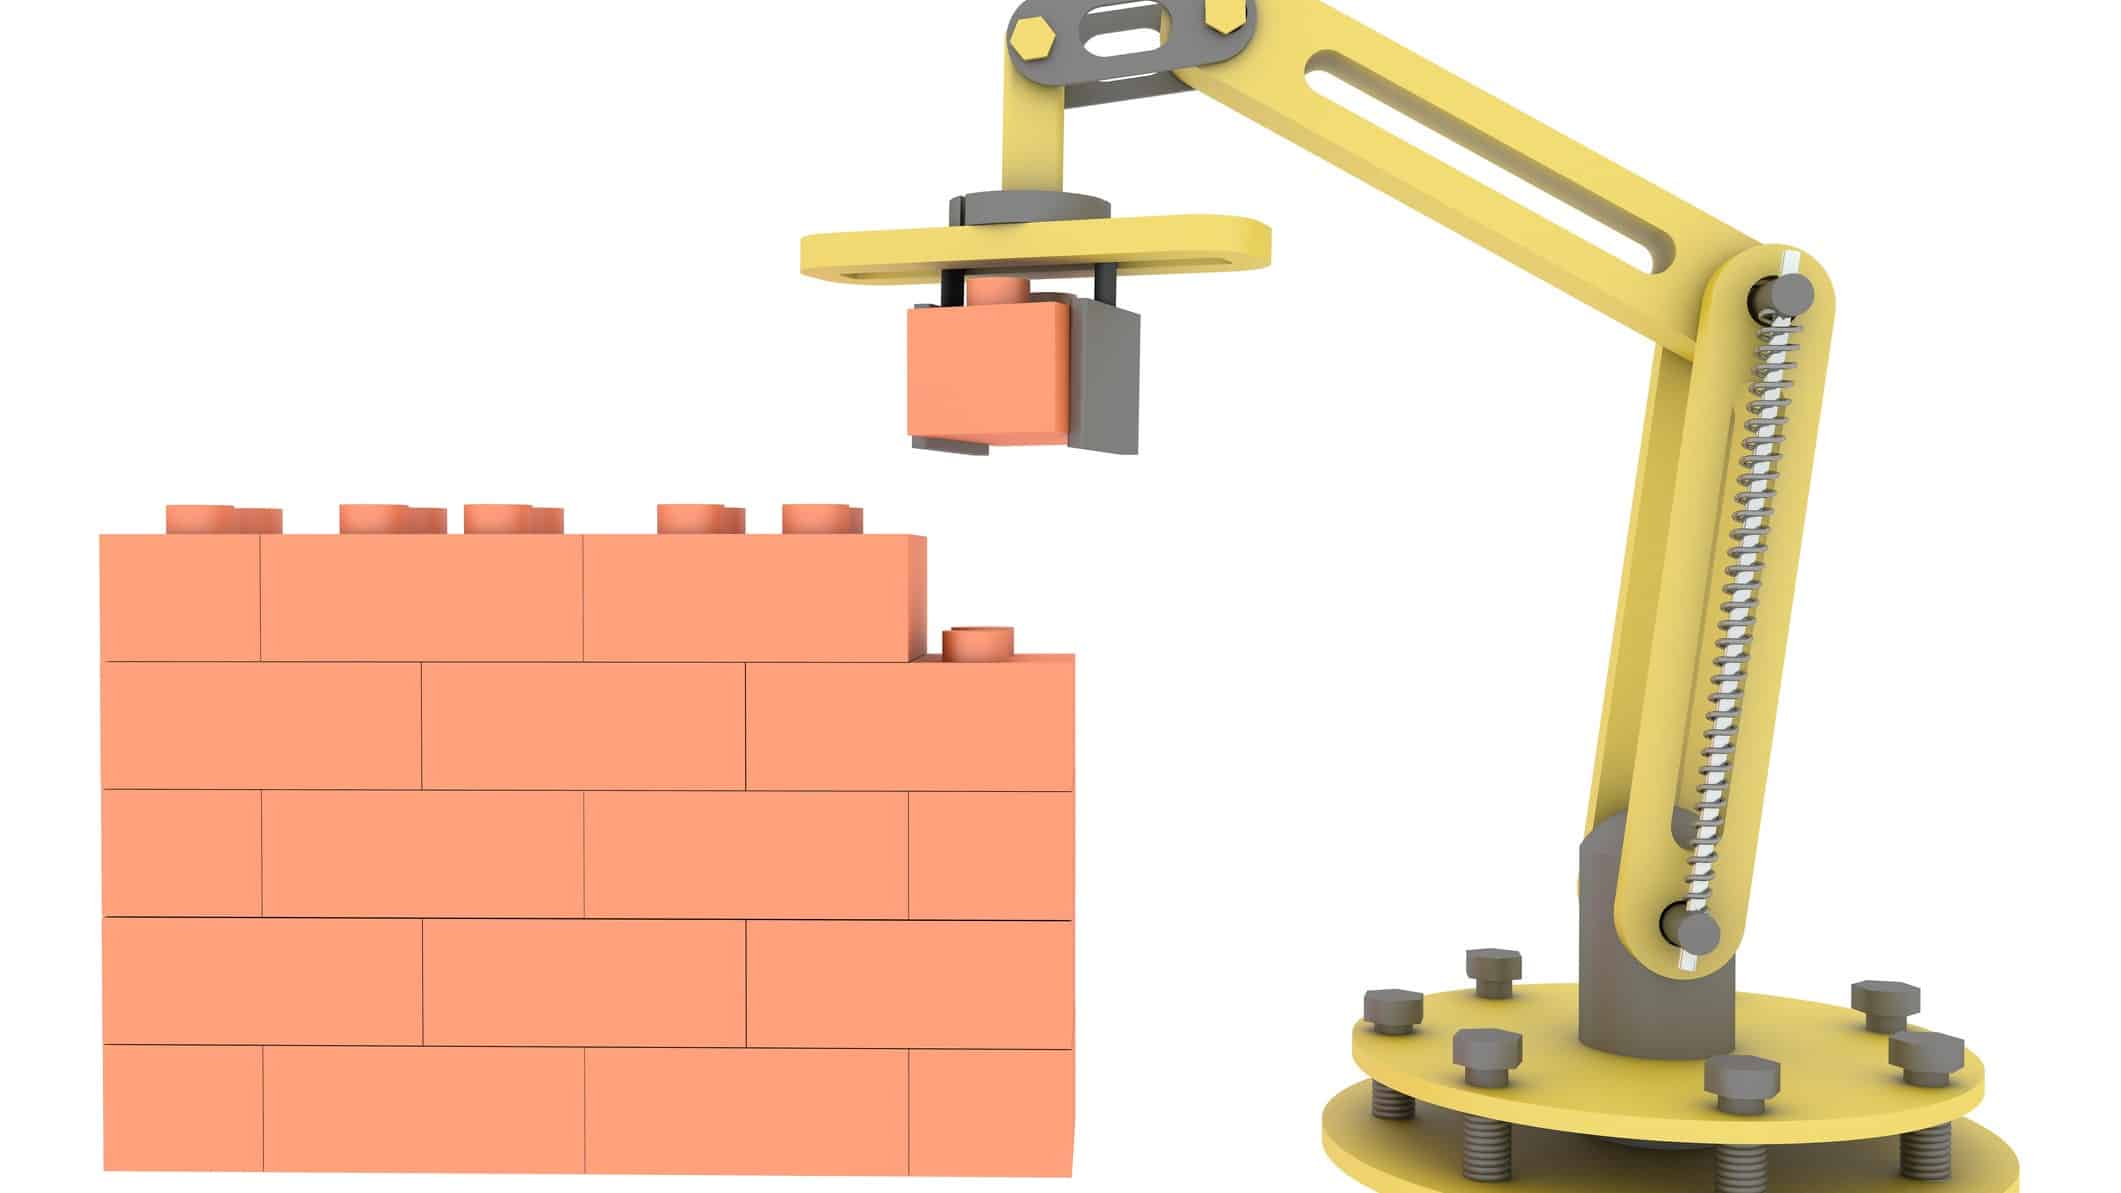 Meet 'Hadrian X', the bricklaying sending the FBR price 9% higher today